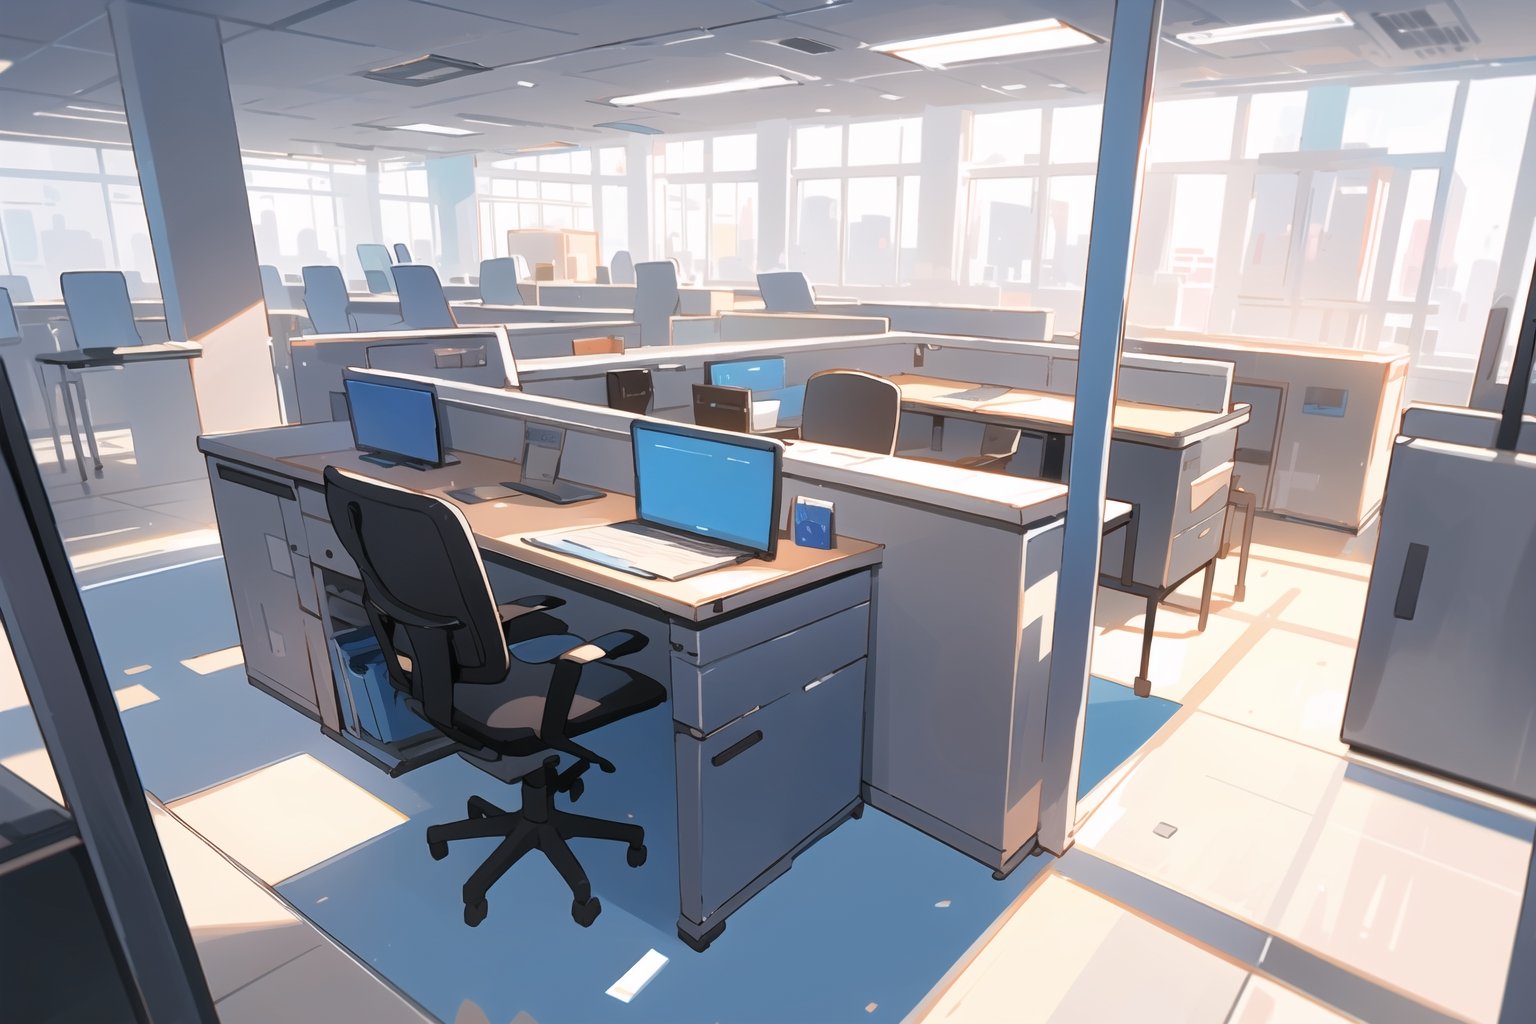 (master piece, best quality), morden office, desk, black chair, file folder, high partition, office items, blue clutter, eye level perspective, no people, only background, warm atmosphere, midjourney, detail background, contemporary